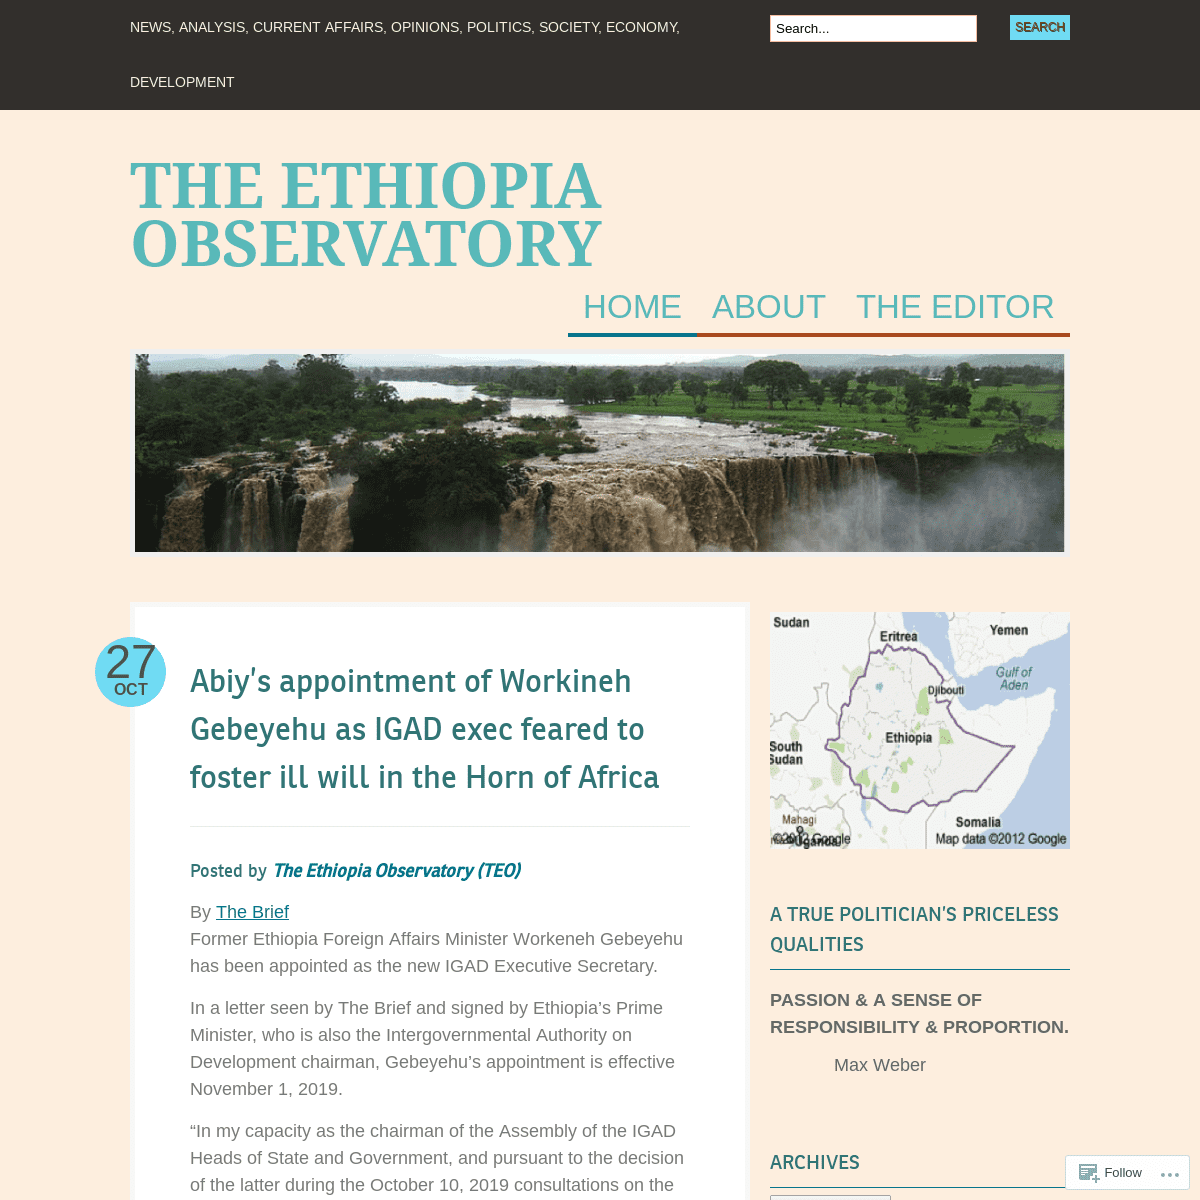 A complete backup of ethiopiaobservatory.com